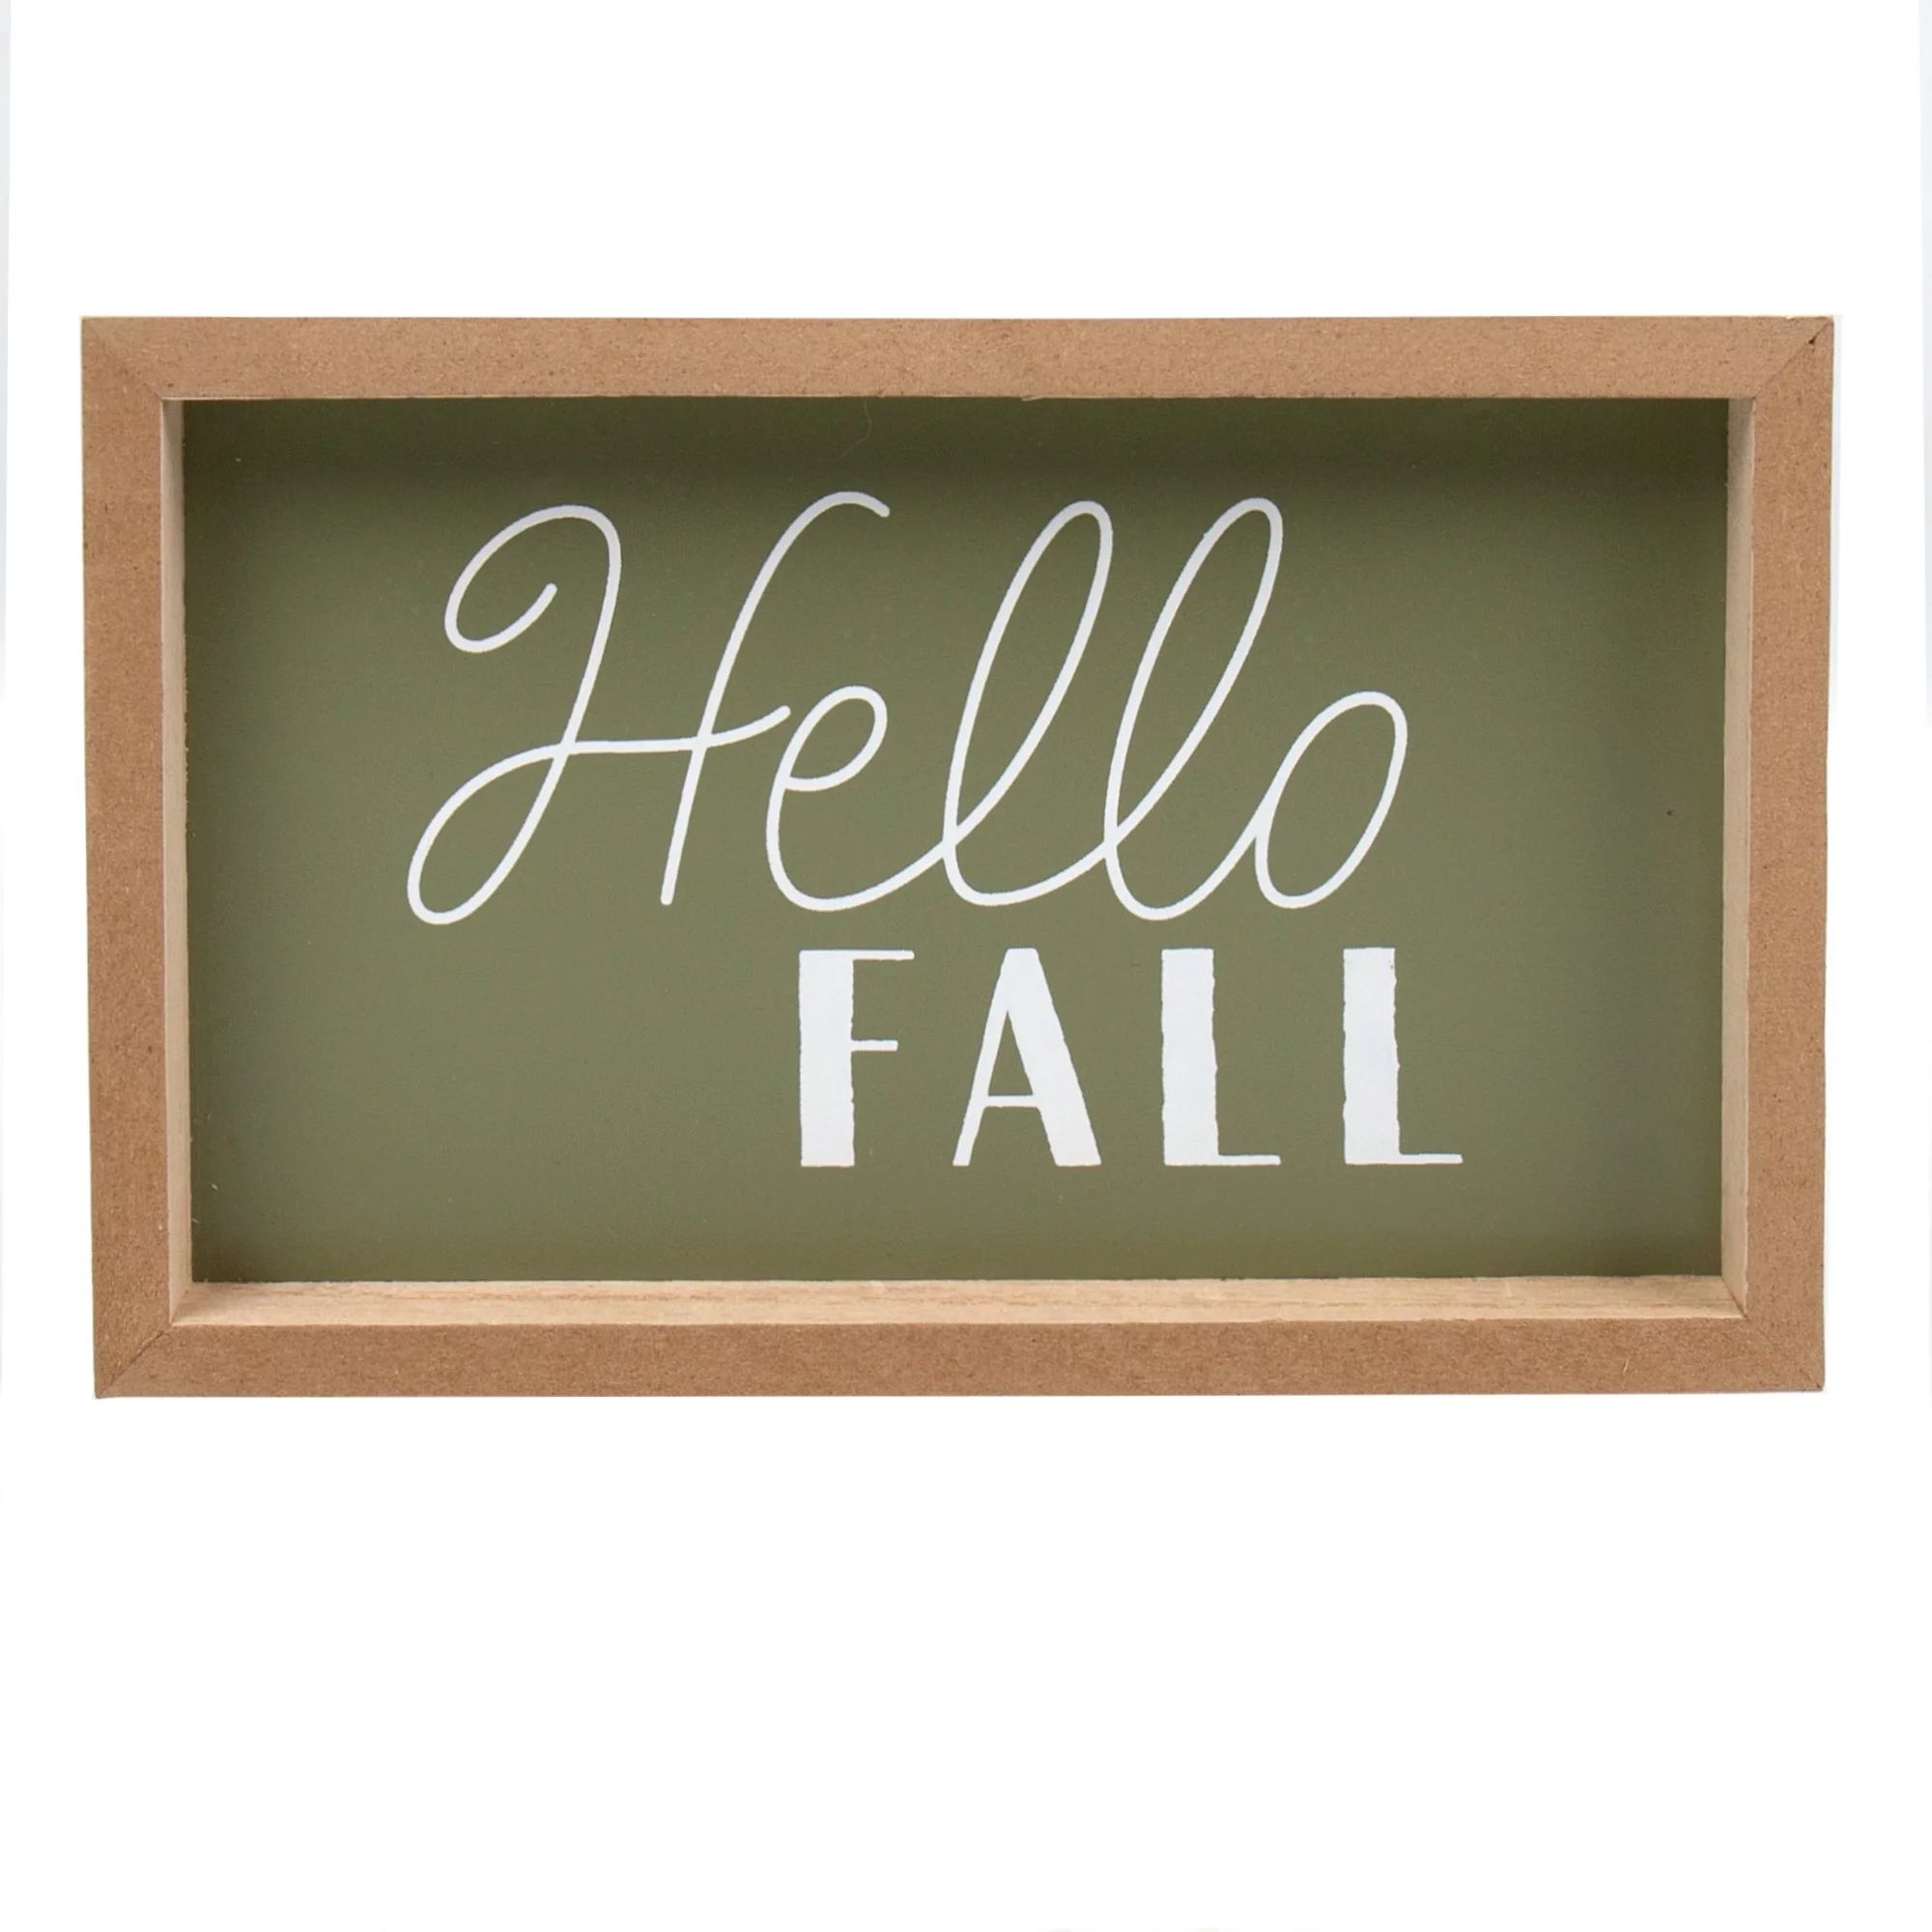 Reversible Multicolor Tabletop Sign, Hello Fall & Leafy Sidewalks Shadowbox, by Way To Celebrate ... | Walmart (US)